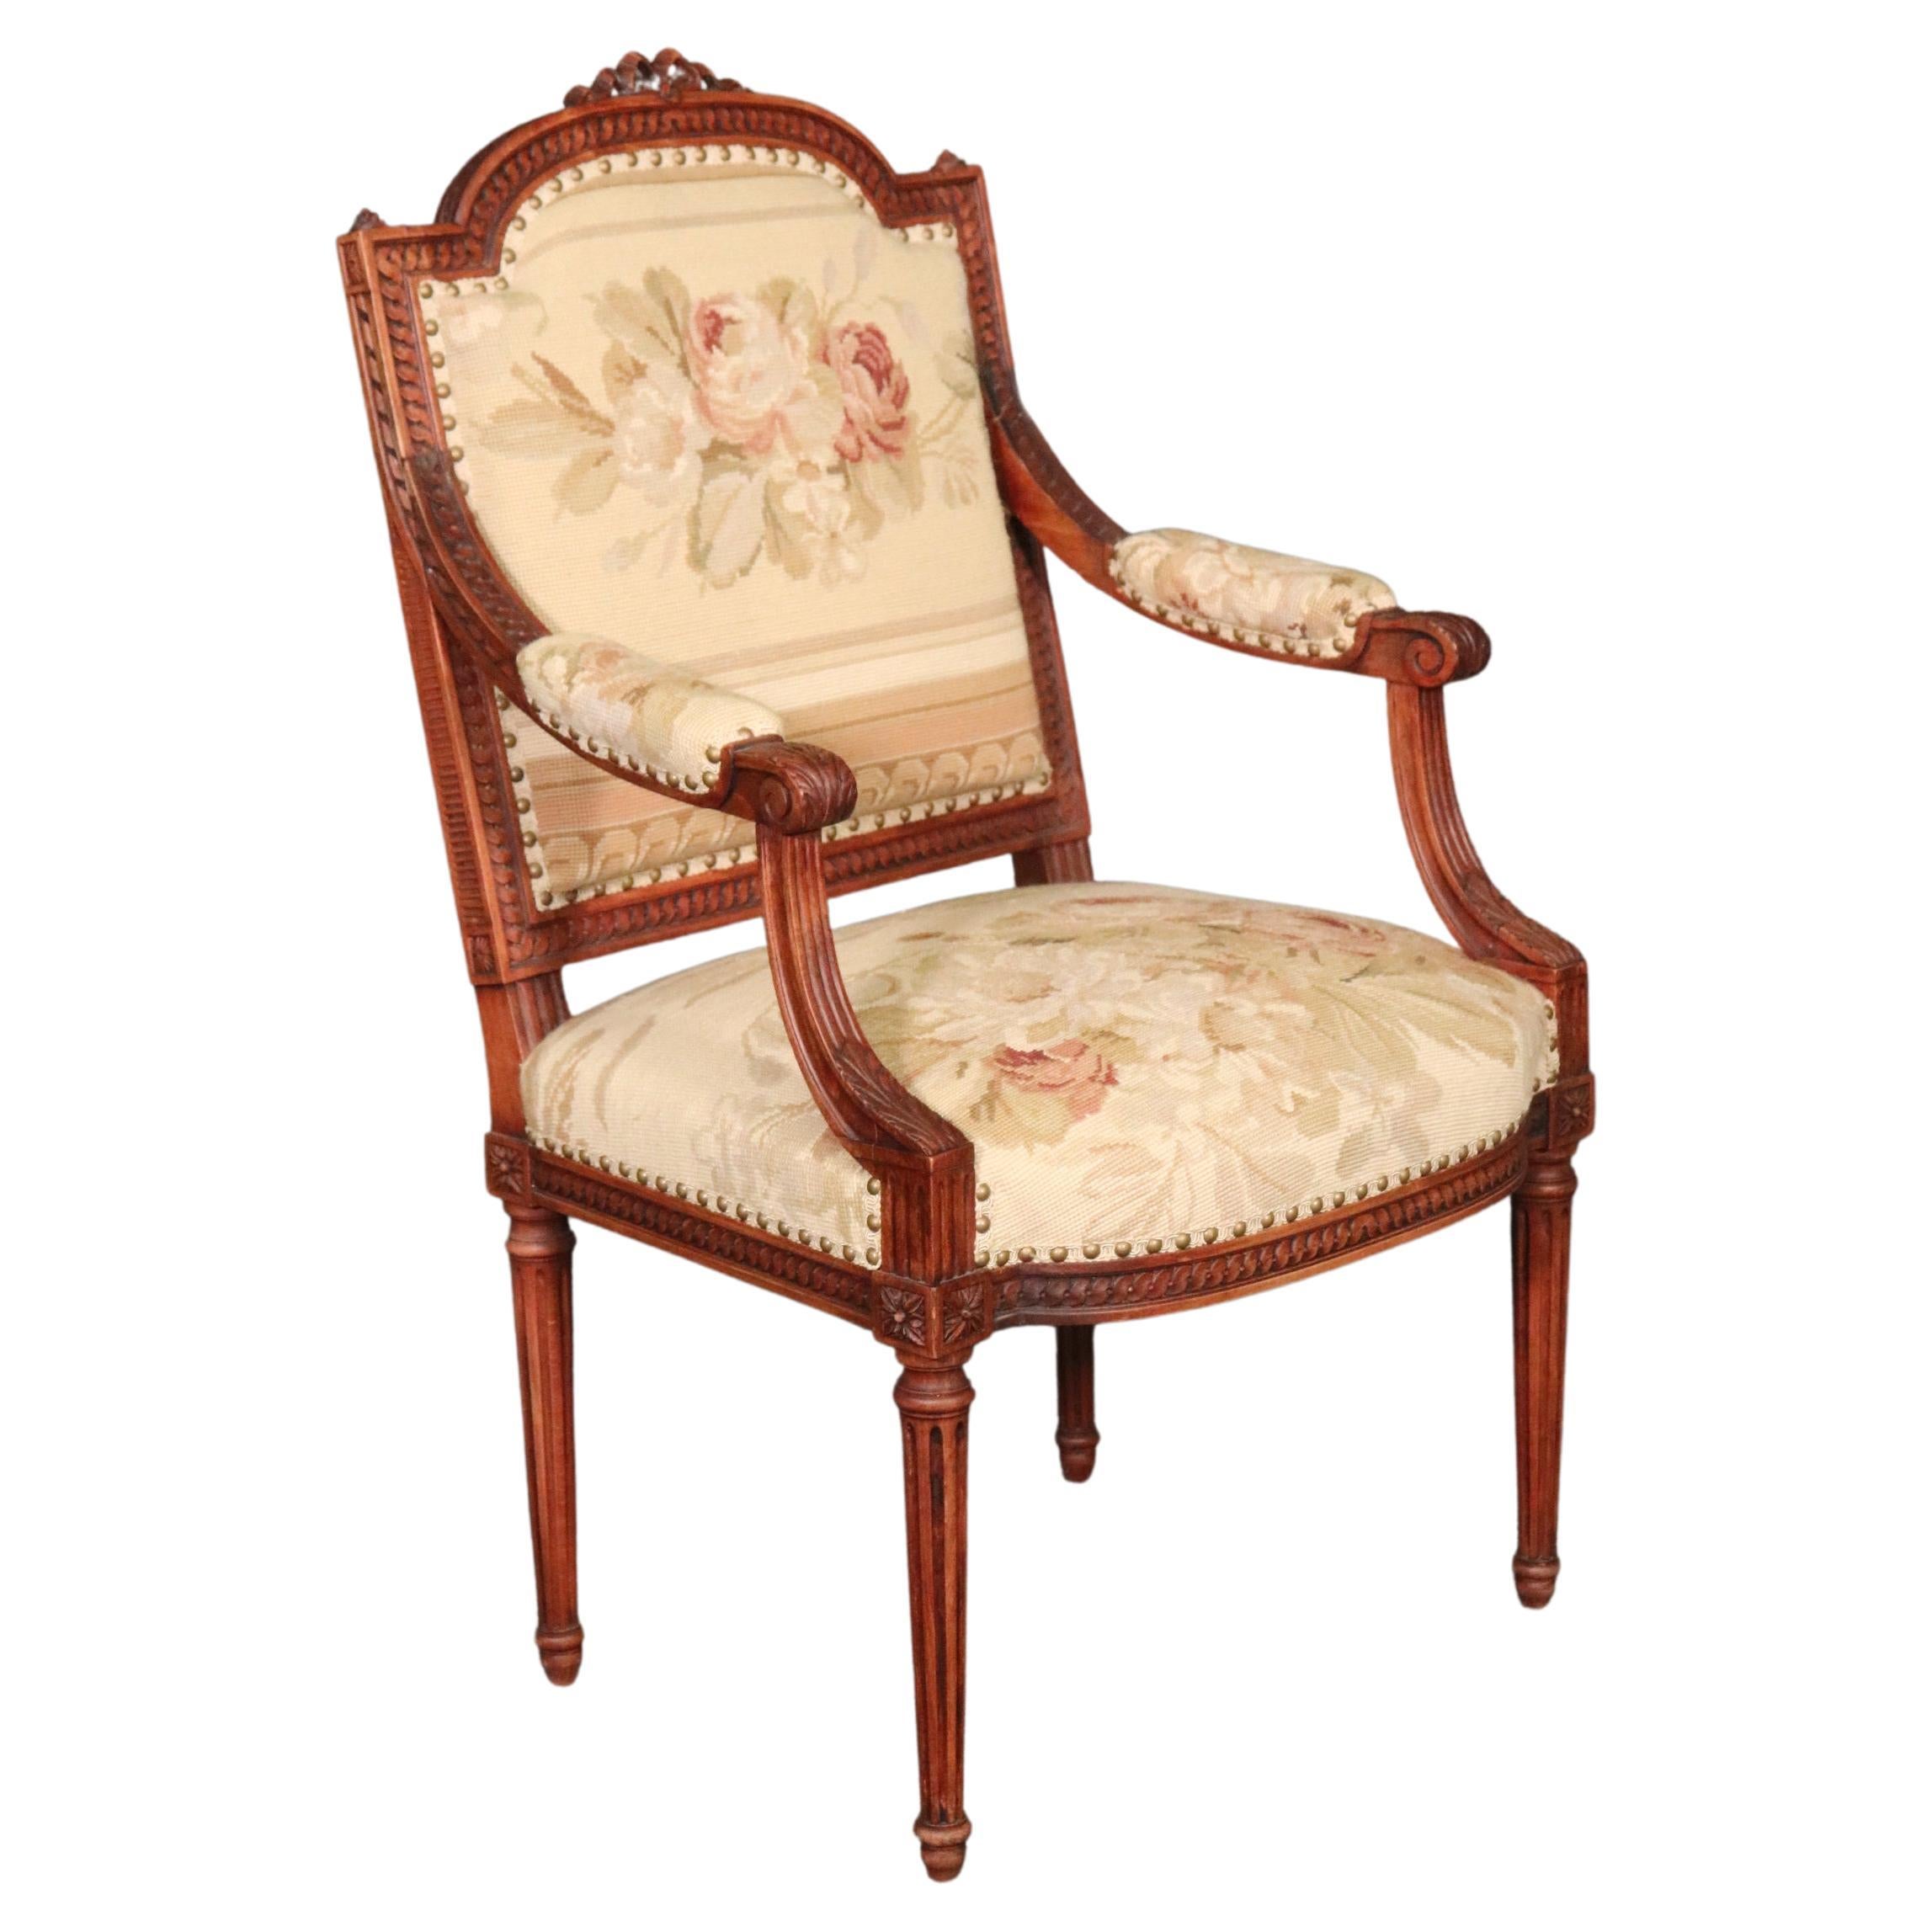 French Louis XVI Needlepoint Fauteuil Armchair in Walnut, circa 1890 For Sale